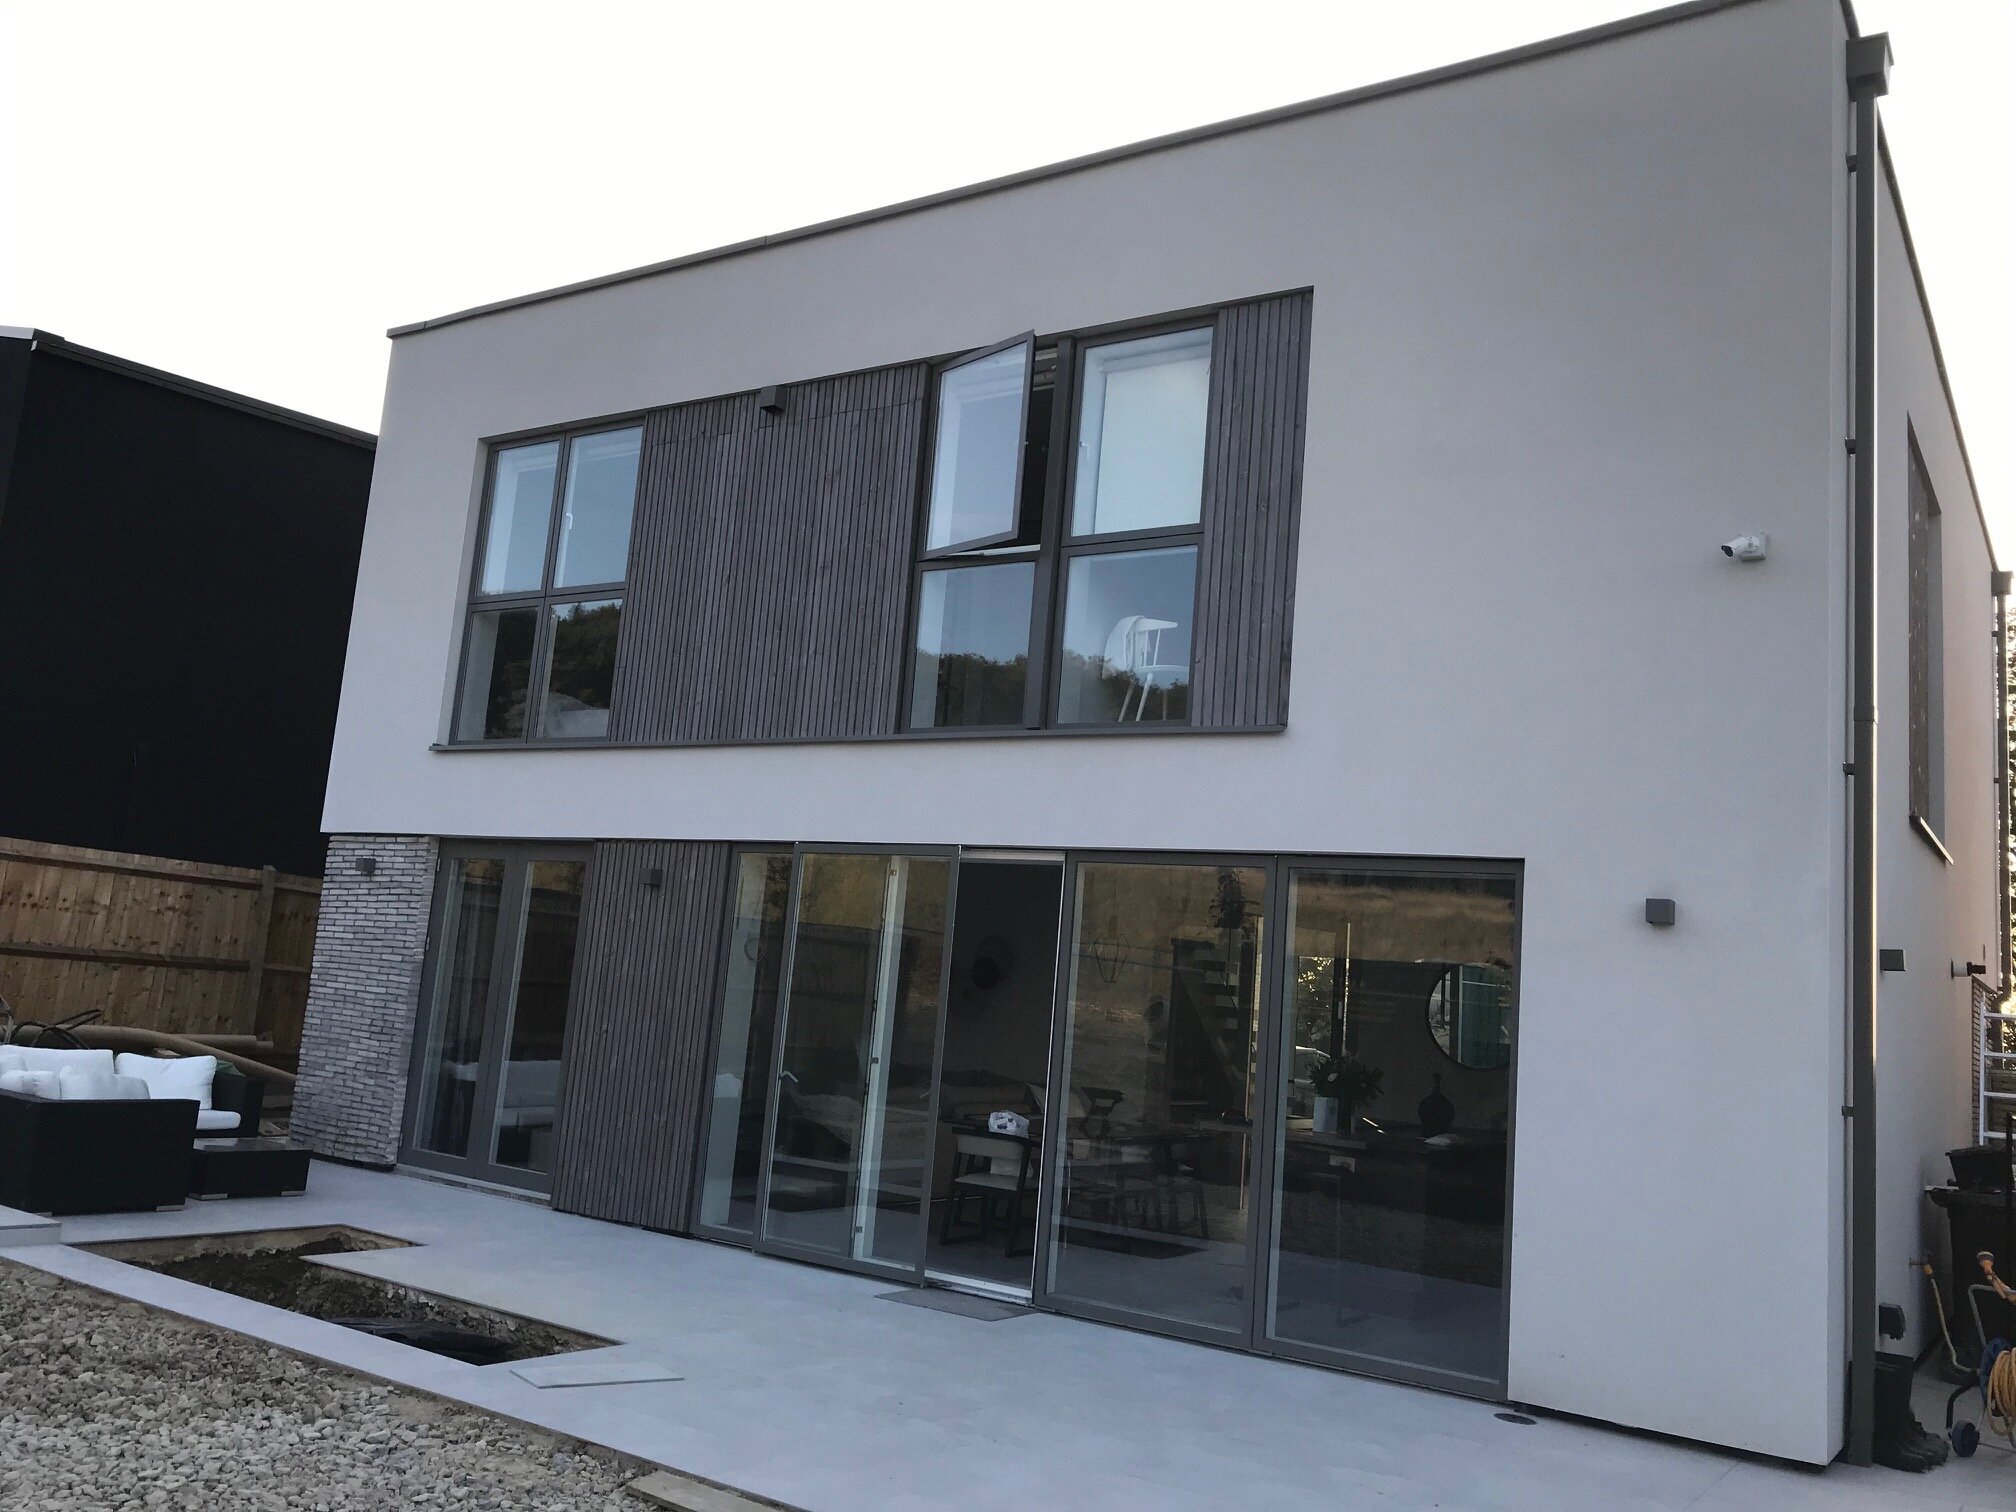 Self-build home in Graven Hill, Bicester